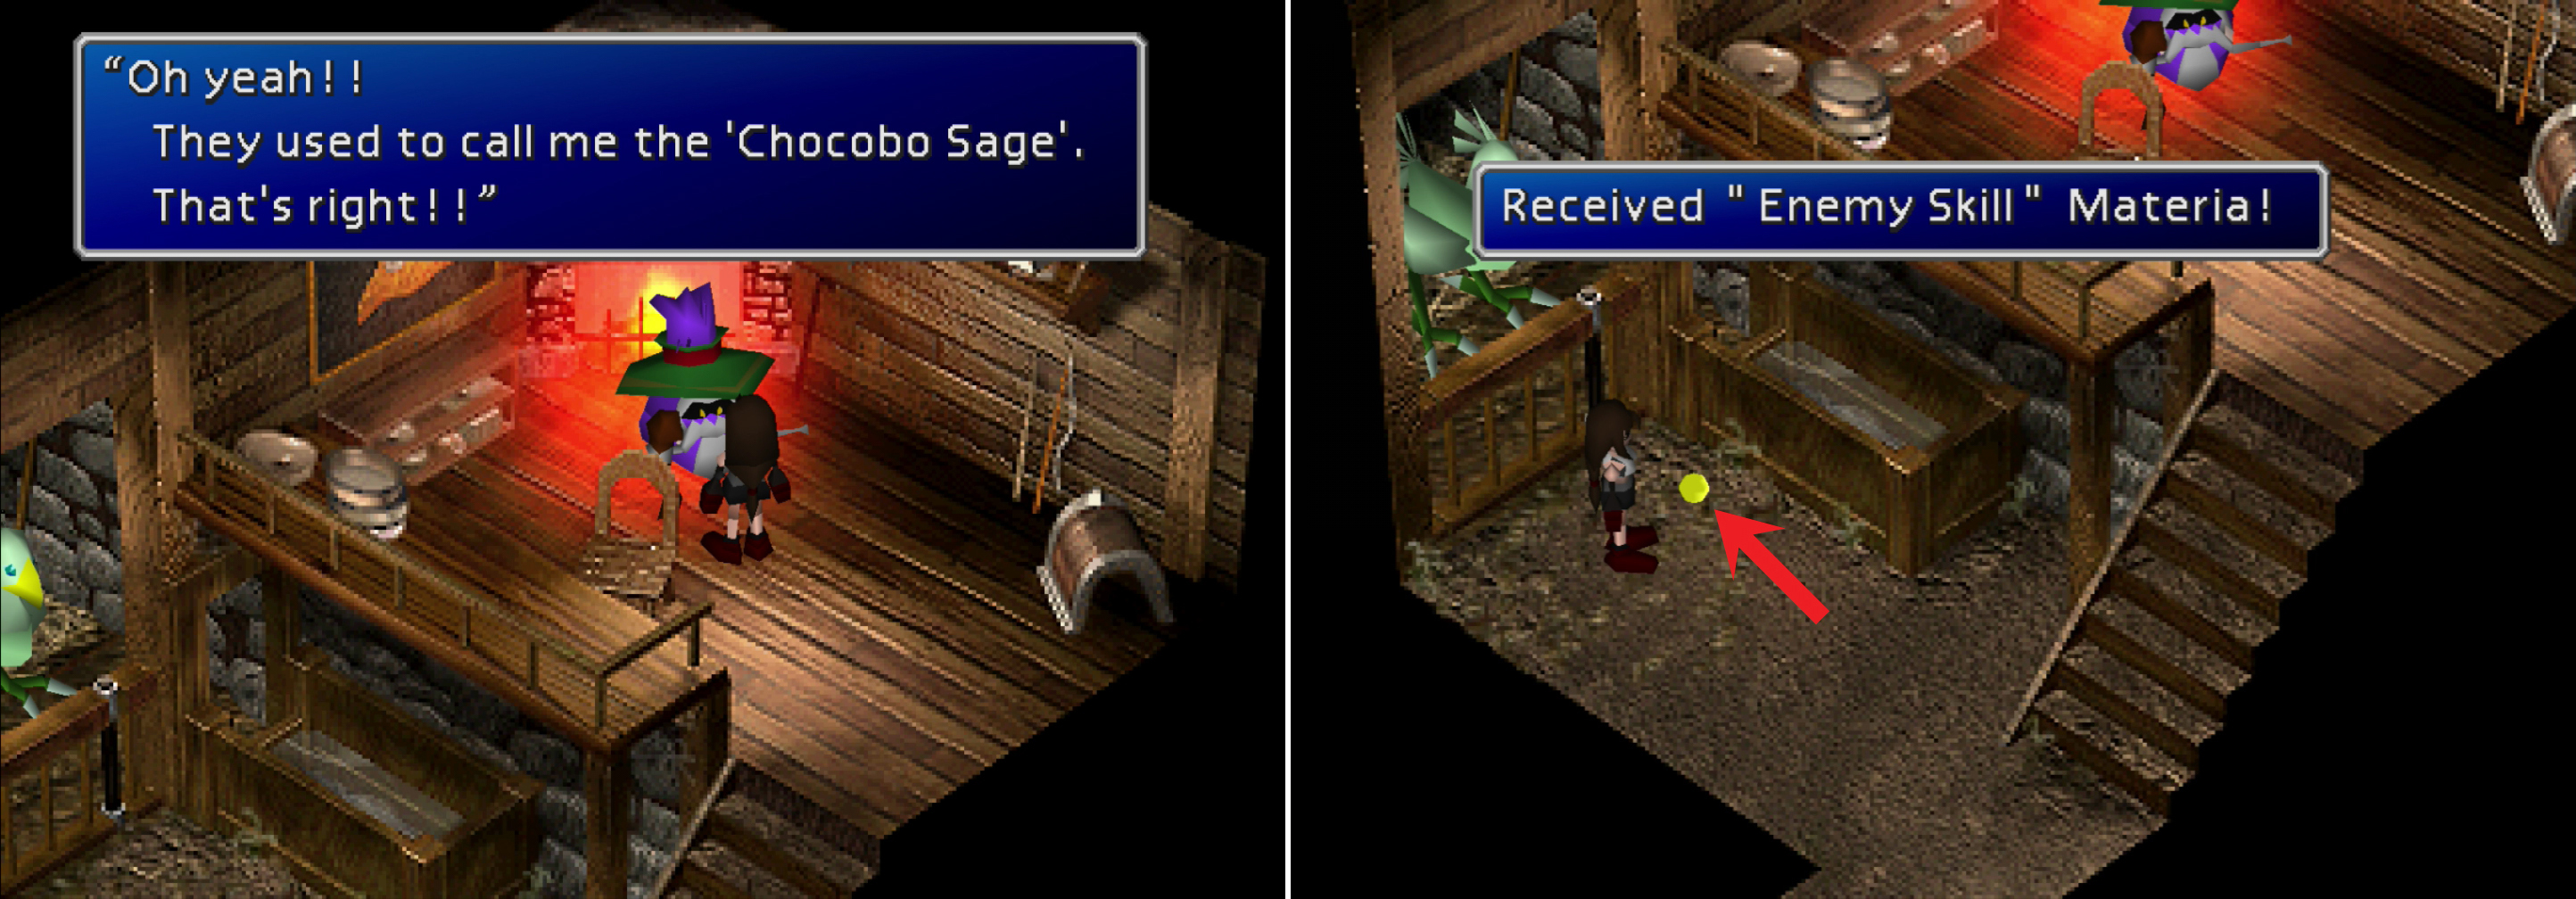 The Chocobo Sage will tell you all you need to know about breeding rare Chocobos (left). Be sure to talk to the Green Chocobo to obtain the final piece of Enemy Skill Materia (right).